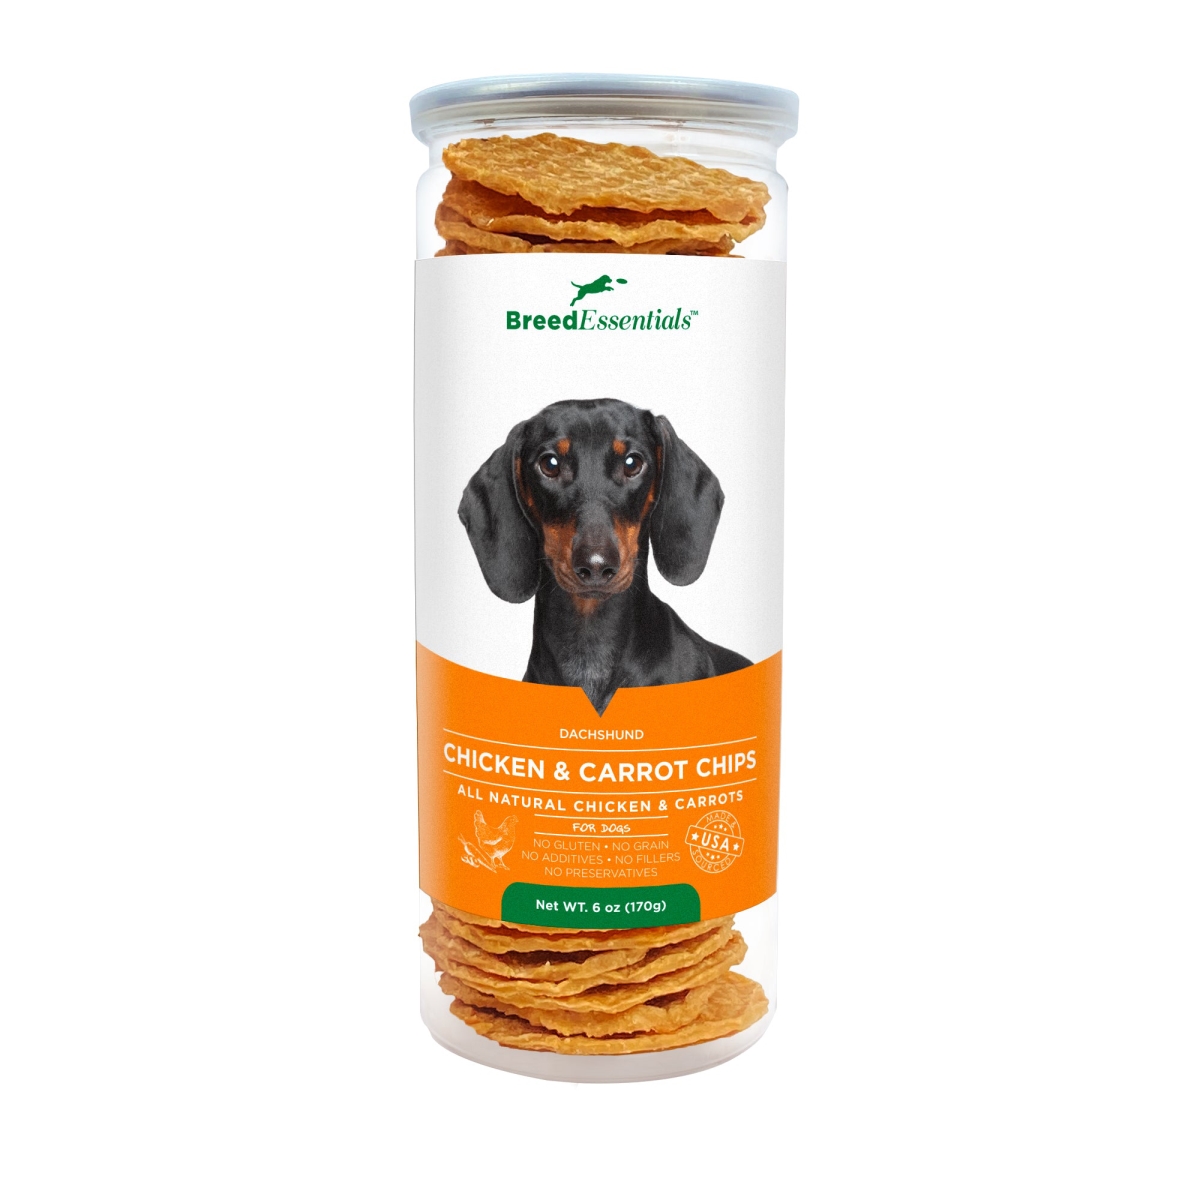 Picture of Breed Essentials 197247000433 6 oz Chicken & Carrot Chips - Dachshund